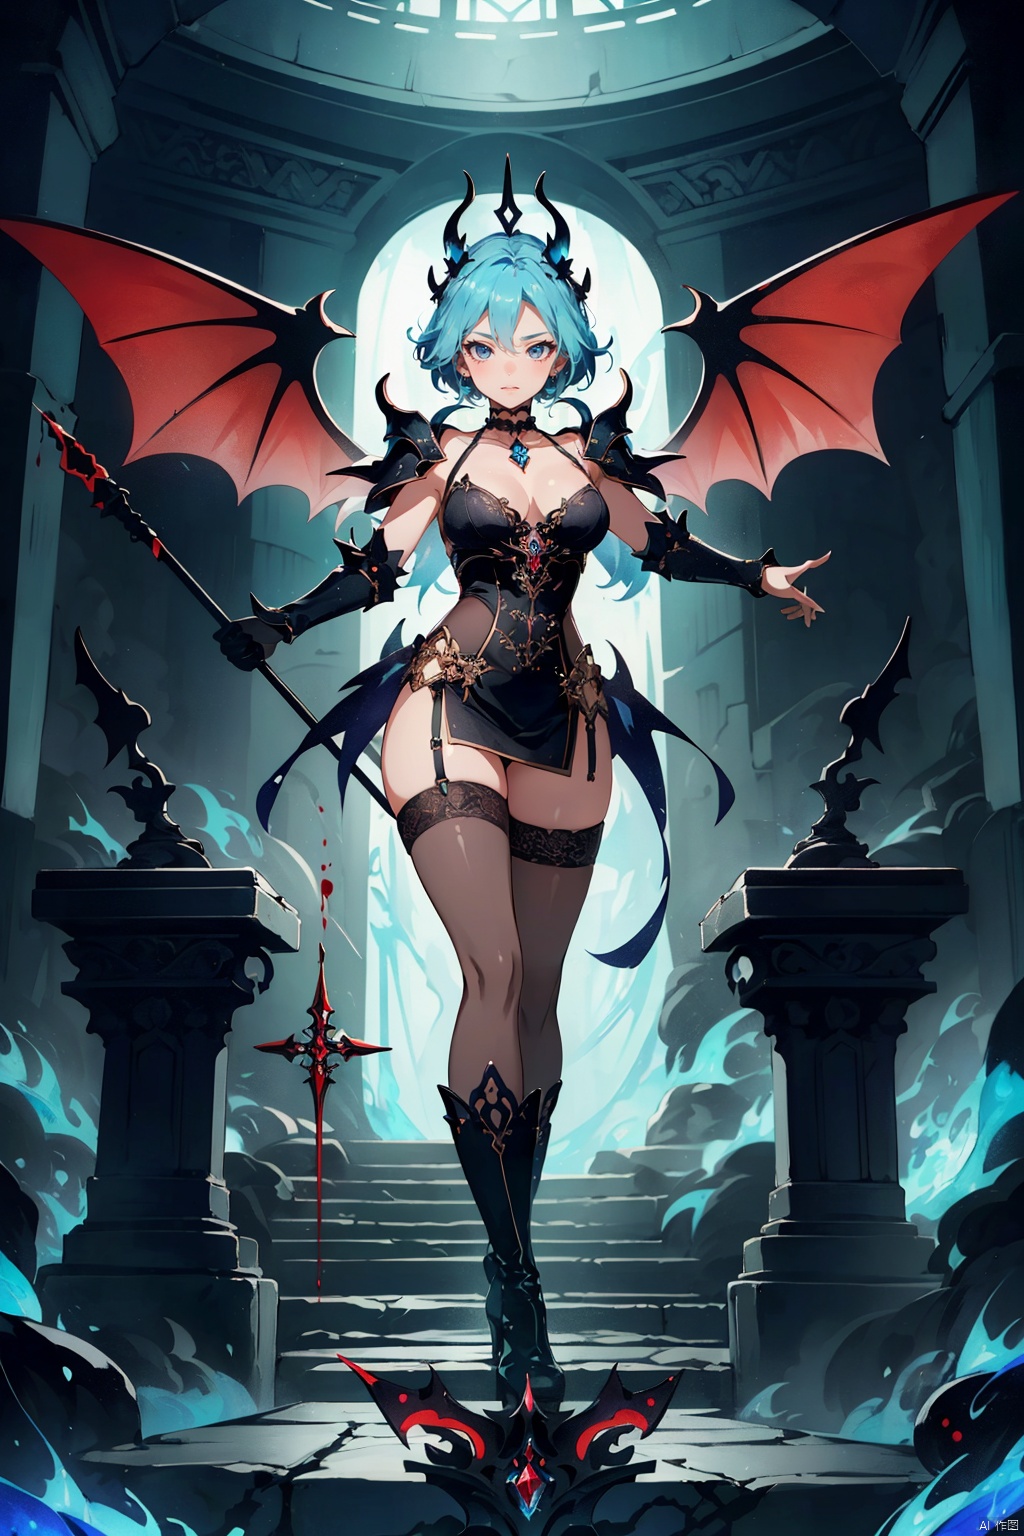 1girl, (alluring and mischievous succubus), ((full body)), (demonic wings spread out behind her, translucent and shimmering with ethereal energy), (lithe form clad in form-fitting dark leather or scale-like armor revealing sensual curves), (tail coiled around one leg suggestively), (exposed midriff with intricate arcane tattoos or markings), (upper body dressed in a plunging neckline corset with lace accents), (shoulder pauldrons adorned with demonic motifs), (dark horns curling upwards from her forehead, polished and gleaming), (piercing gaze with vertically-slitted pupils and smoky eye makeup), (long, flowing hair of midnight black streaked with deep purple highlights), (holding a jeweled scepter or staff imbued with dark power), (standing on an obsidian throne surrounded by swirling shadows), (shimmering aura of dark energy surrounding her feet), (claws tipped with iridescent nail polish), (wearing thigh-high boots with stiletto heels), (a choker necklace featuring a crimson gemstone at its center), (lips painted in a rich, blood-red hue, hinting at forbidden temptation), (background: fiery abyss or mystical underworld)..,((poakl)), ,(wide shot:0.95),(Dynamic pose:1.4), Light master